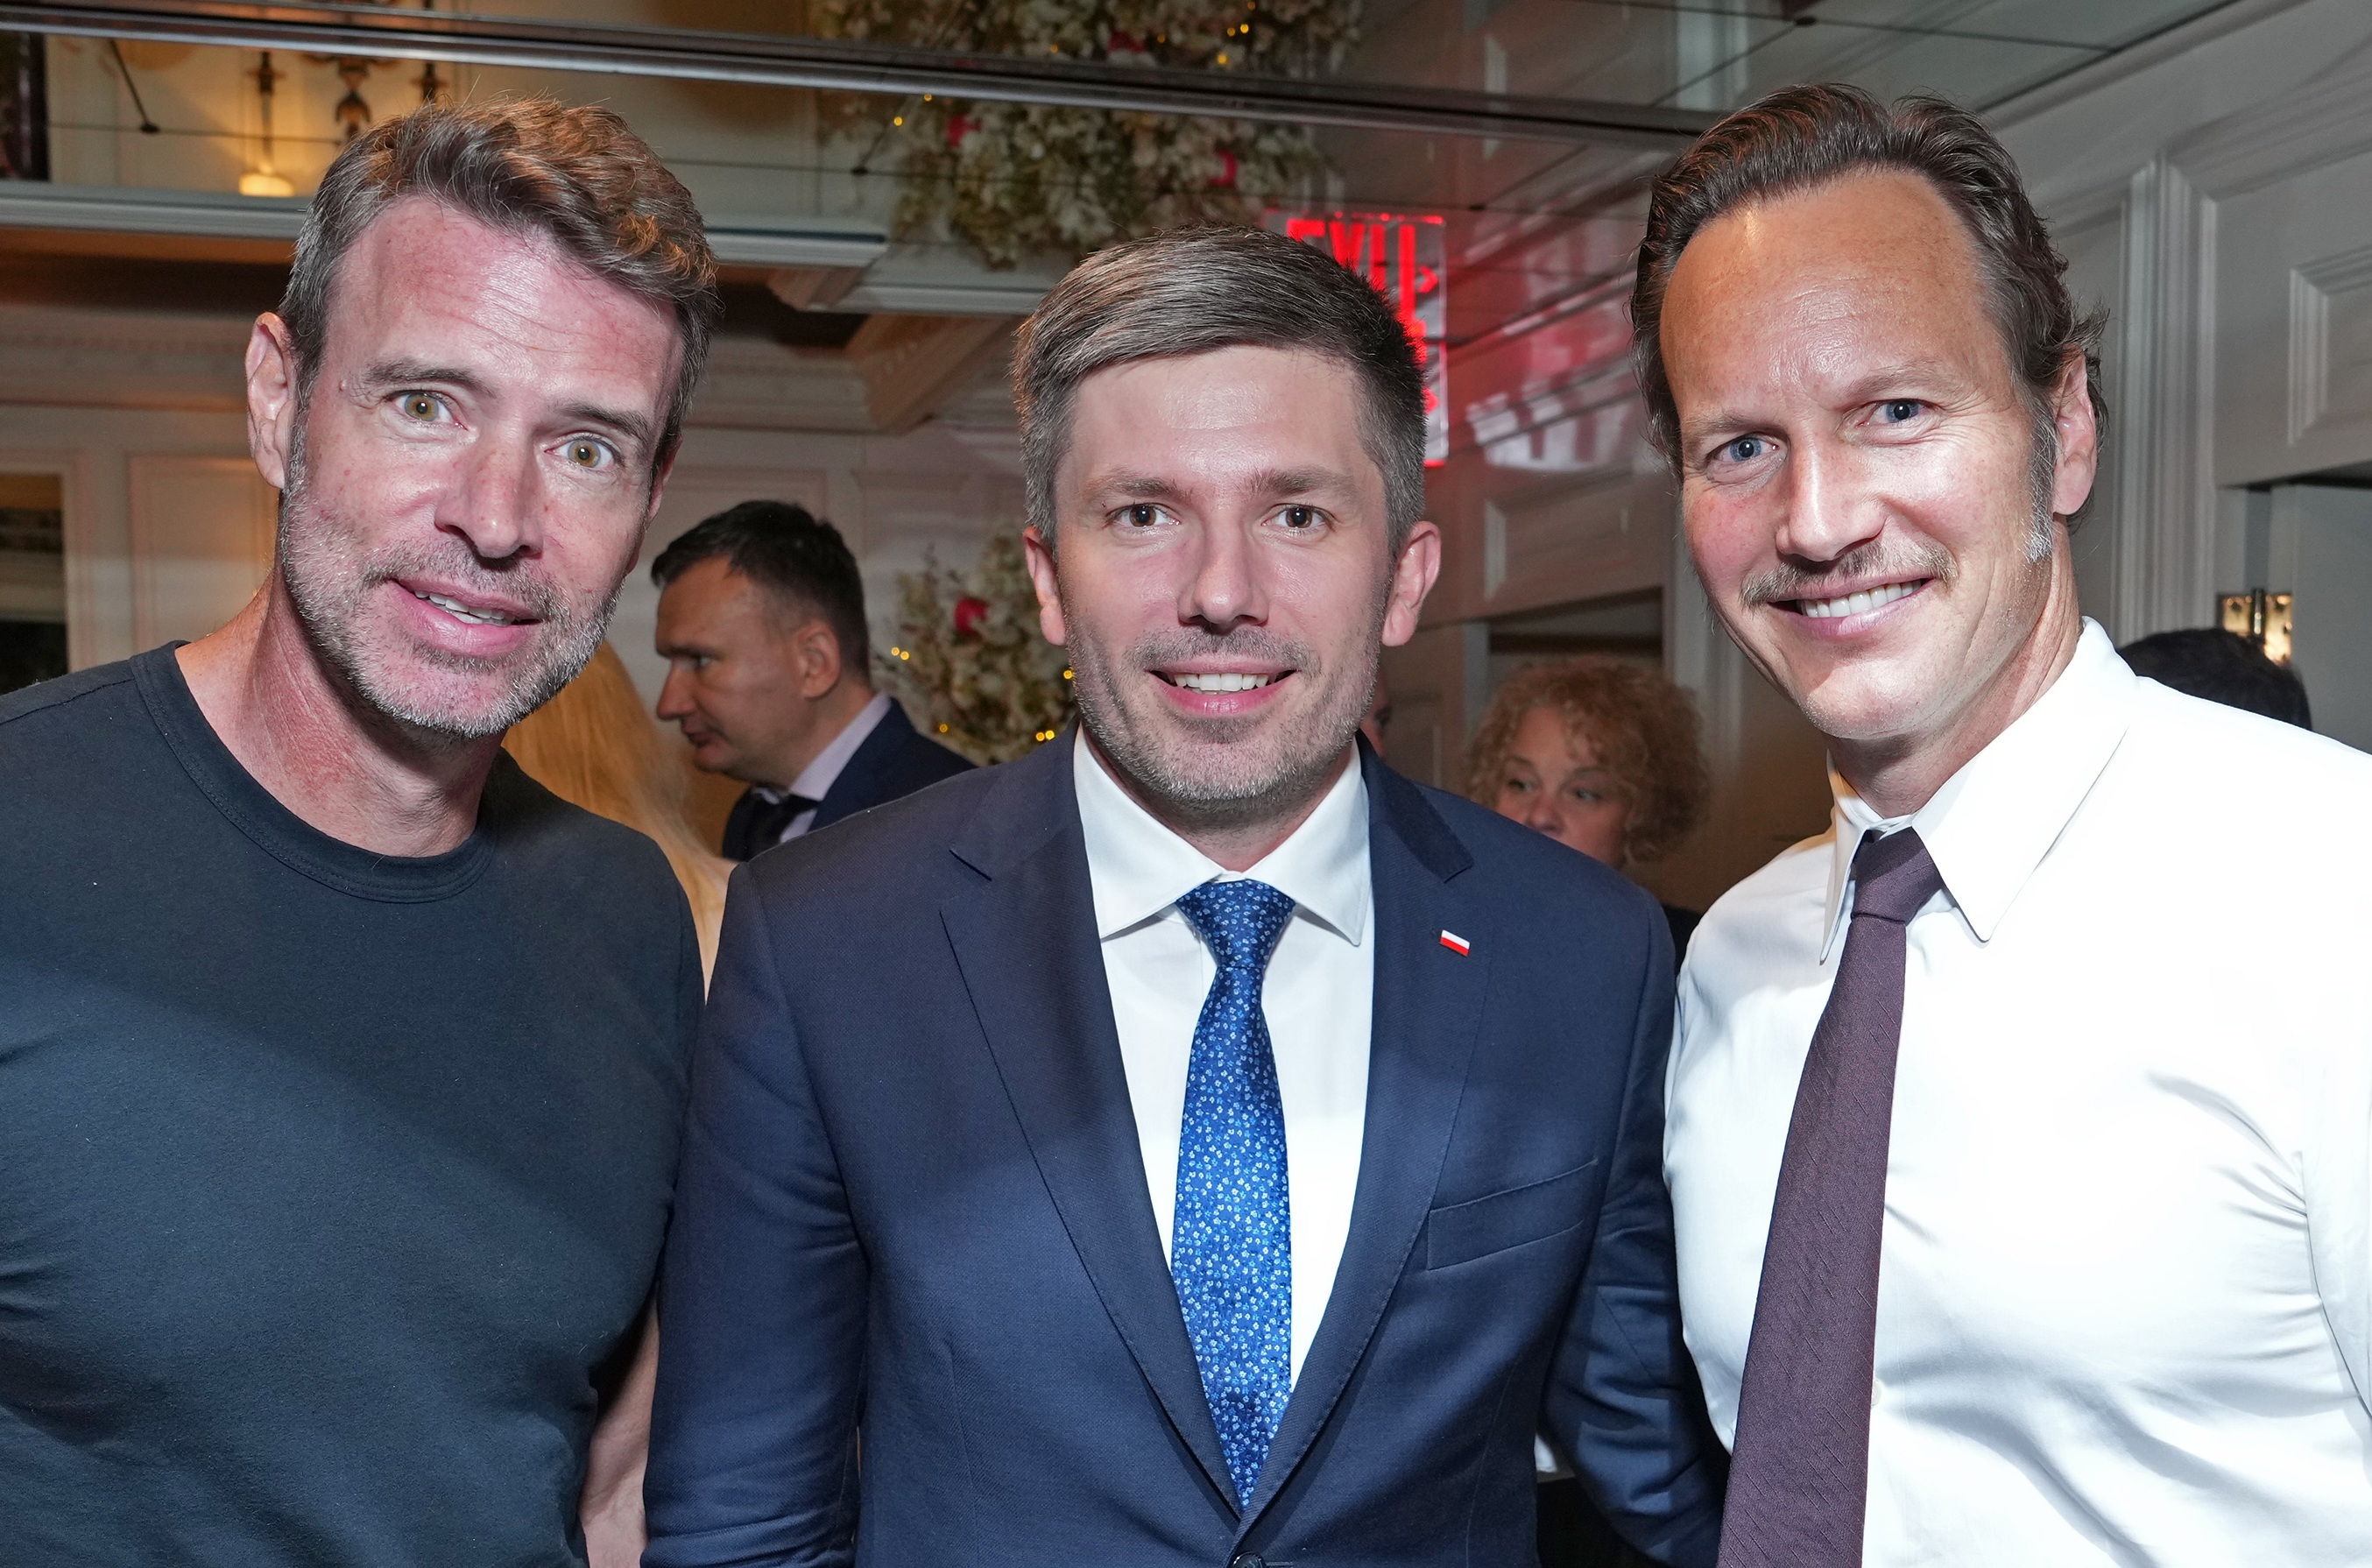 Actors Scott Foley and Patrick Wilson with Adrian Kubicki, Consul General of the Republic of Poland in New York enjoying the Jabłonki celebration hosted by the State of Poland Foundation at The Carlyle Hotel in New York City. Image taken on Monday, September 18, 2023 in New York. (Bennett Raglin/AP Images for State of Poland Foundation)